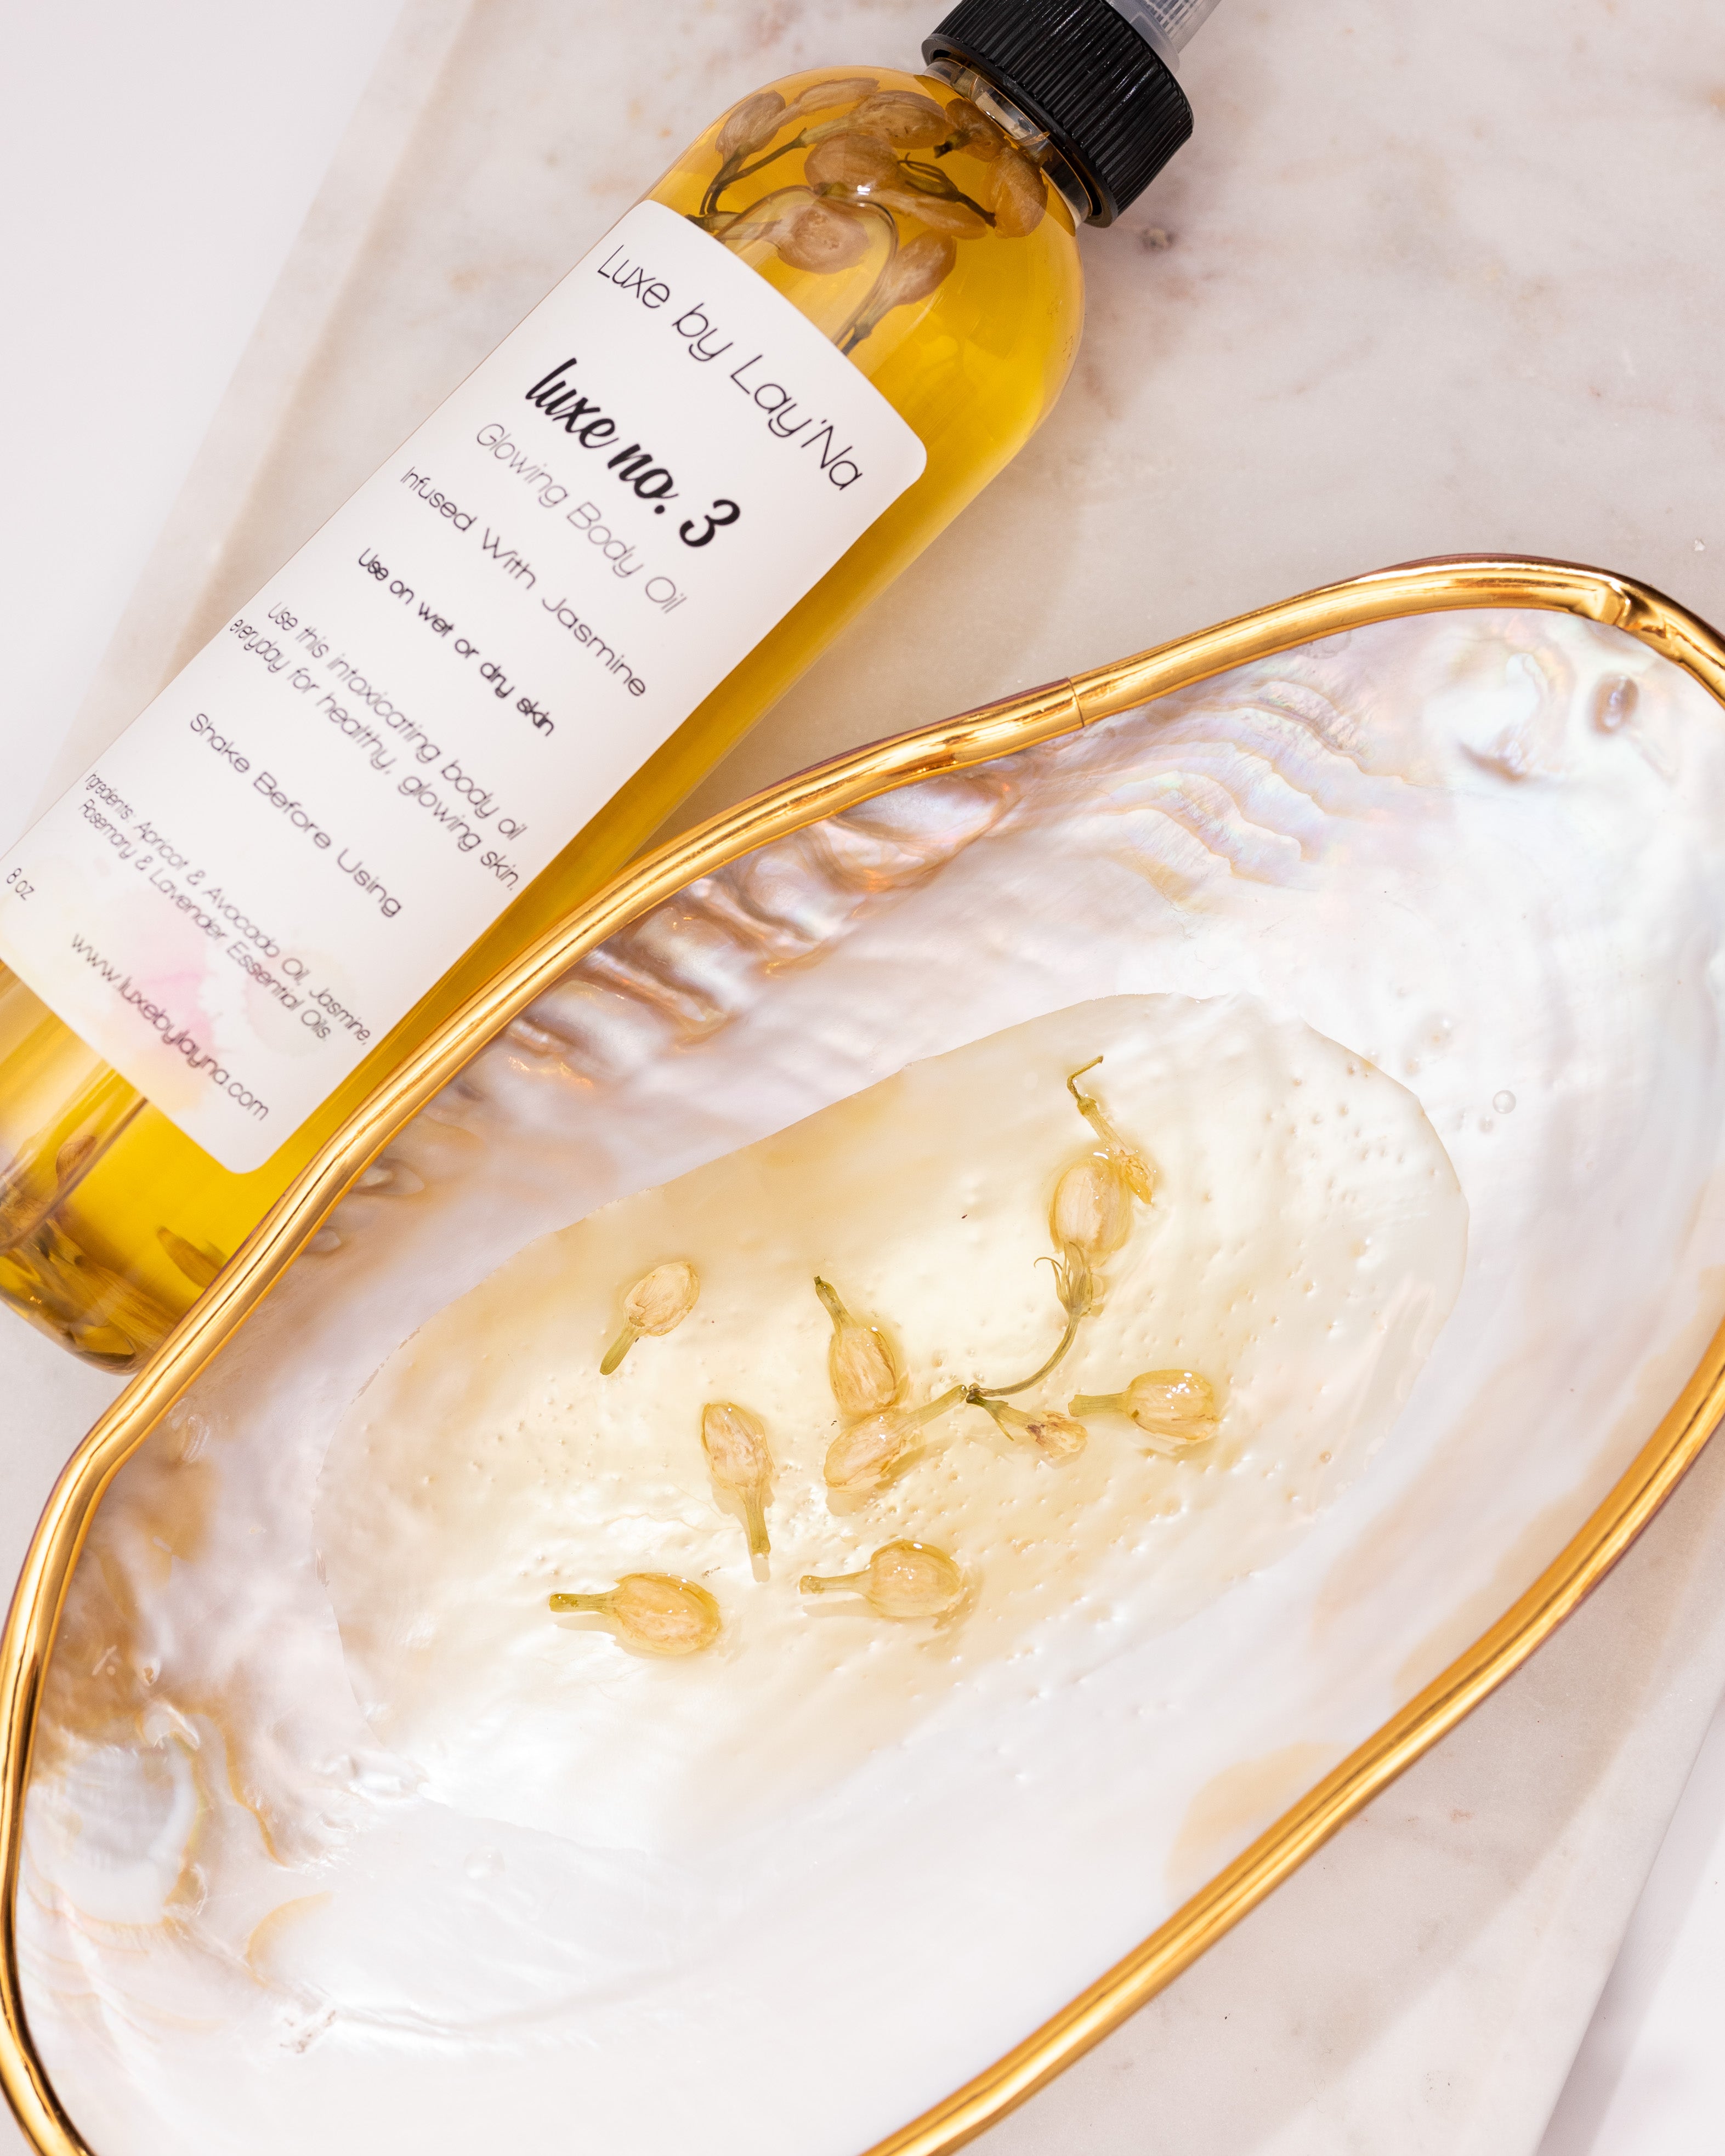 luxe no.3 Glowing Body Oil